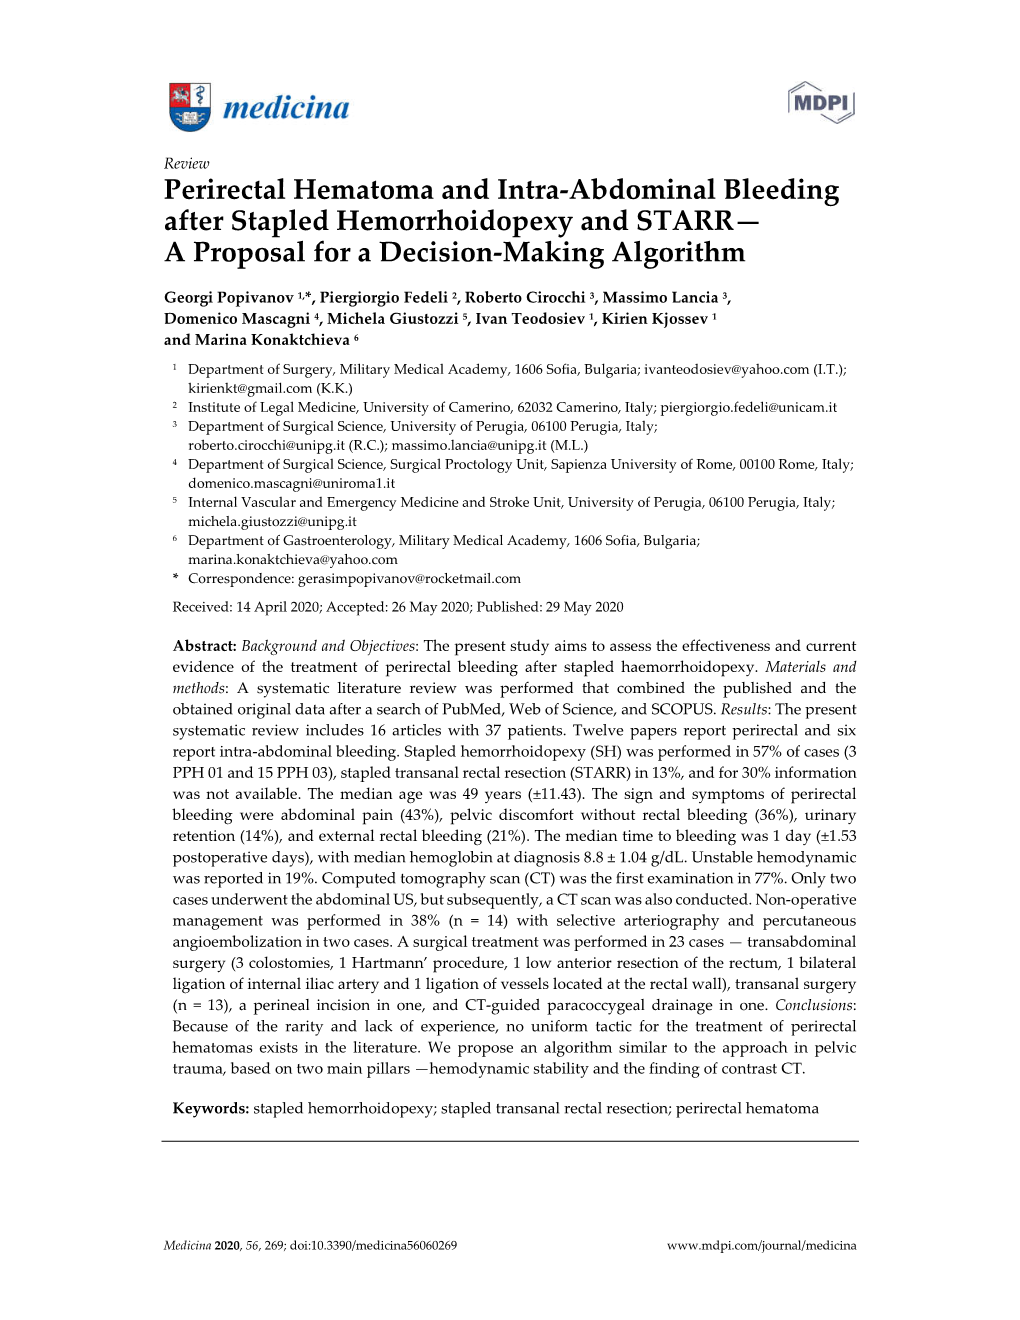 Perirectal Hematoma and Intra-Abdominal Bleeding After Stapled Hemorrhoidopexy and STARR— a Proposal for a Decision-Making Algorithm